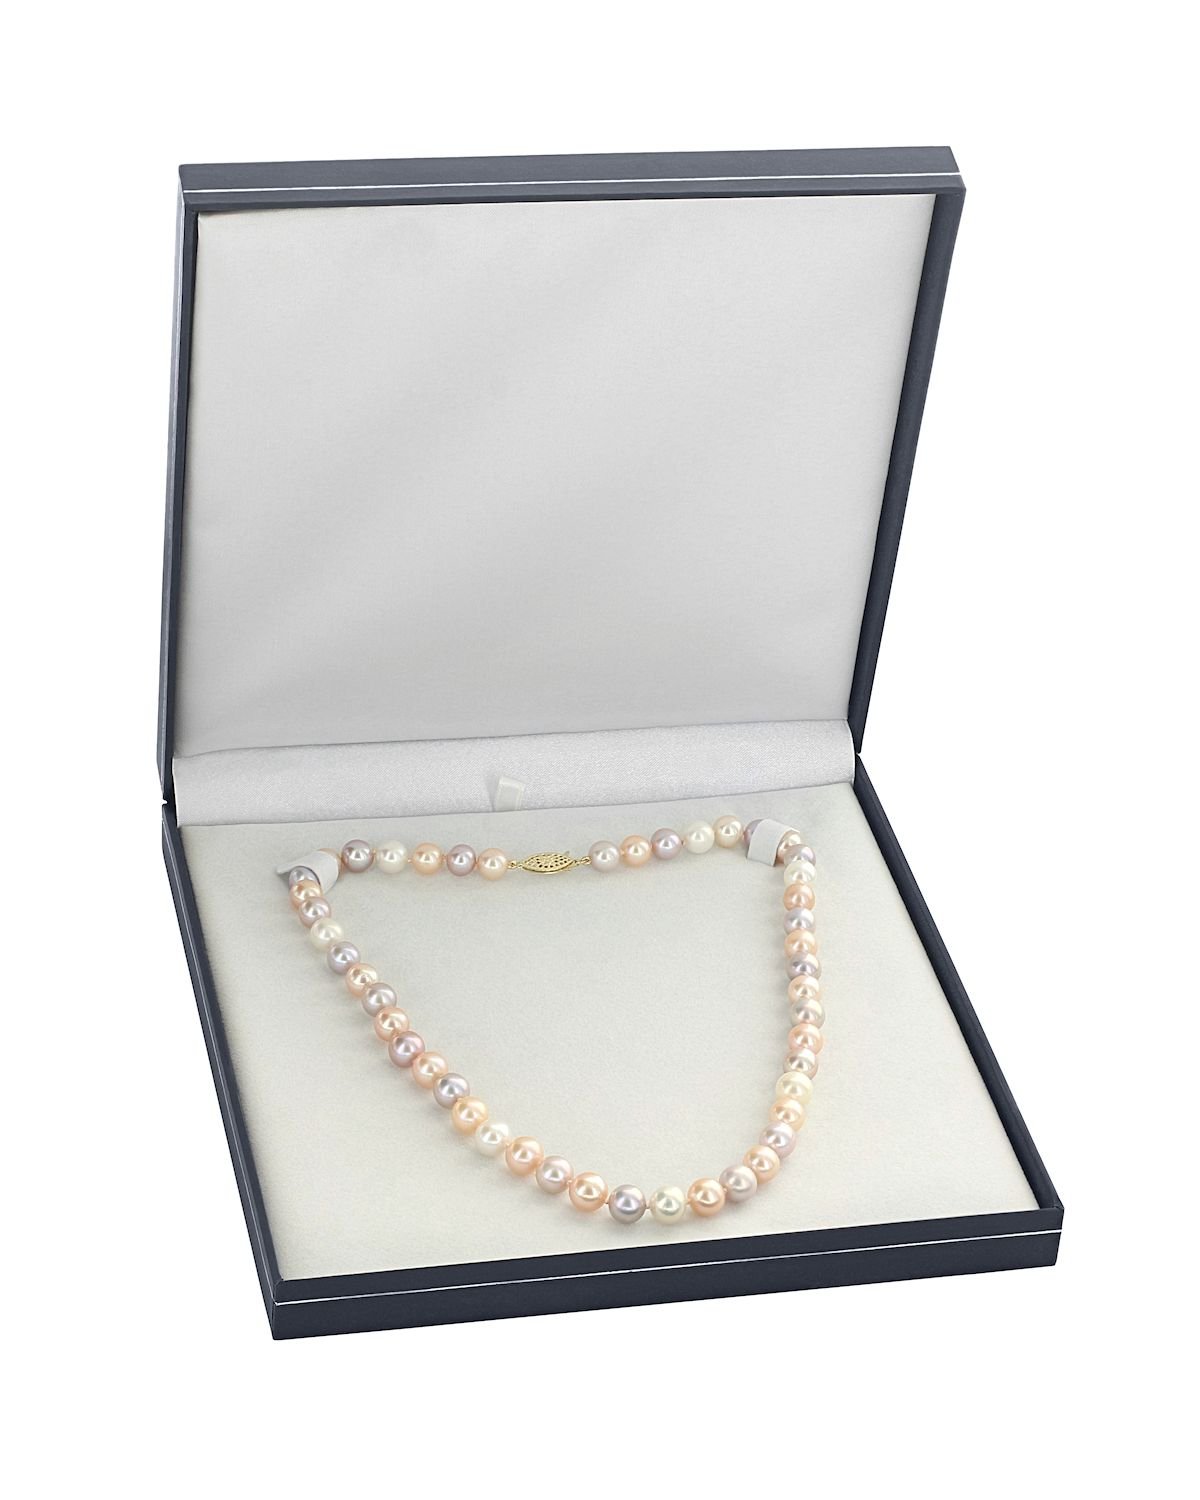 9.5-10.5mm Multicolor Freshwater Pearl Necklace- AAAA Quality - Secondary Image